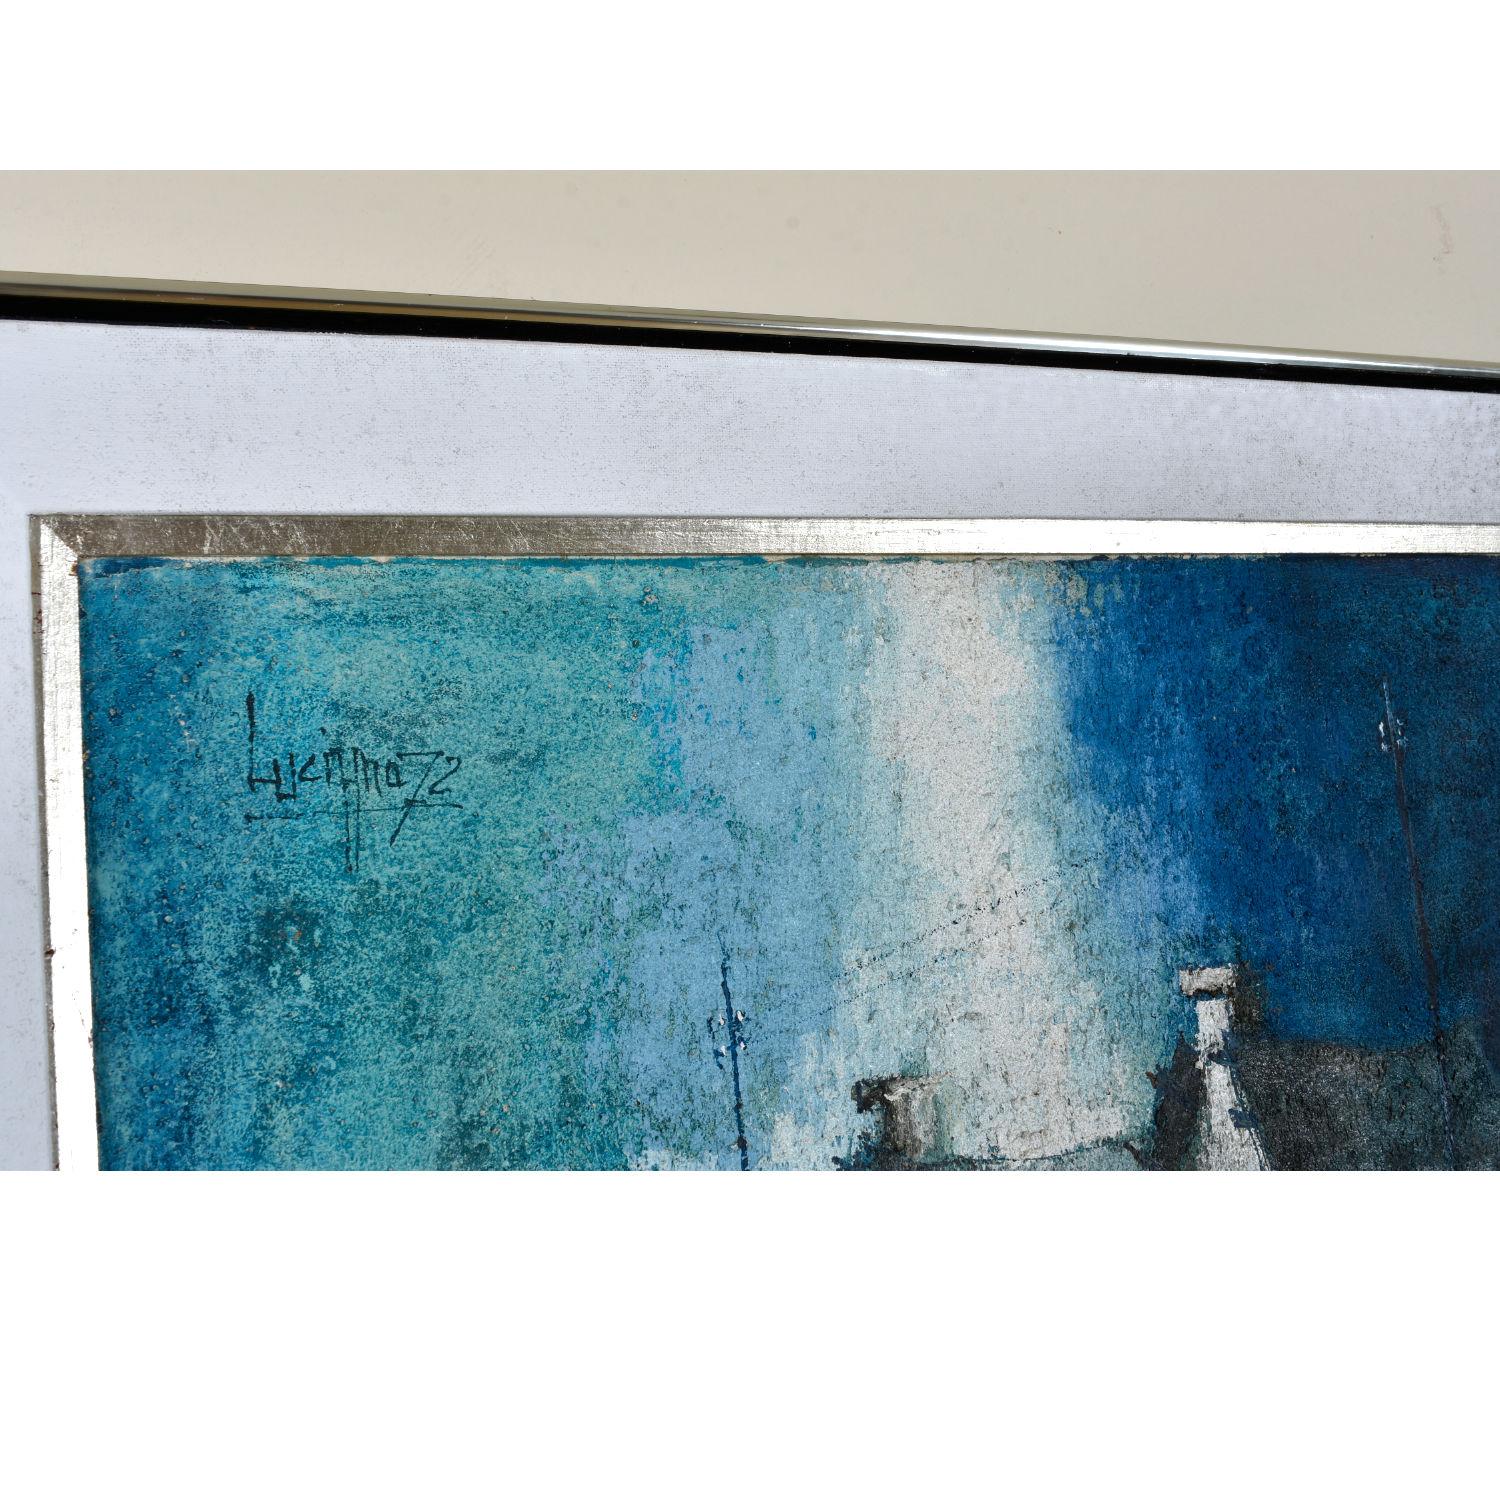 Sublime Expressionist Blue White and Teal Village Landscape Painting with Boat For Sale 1